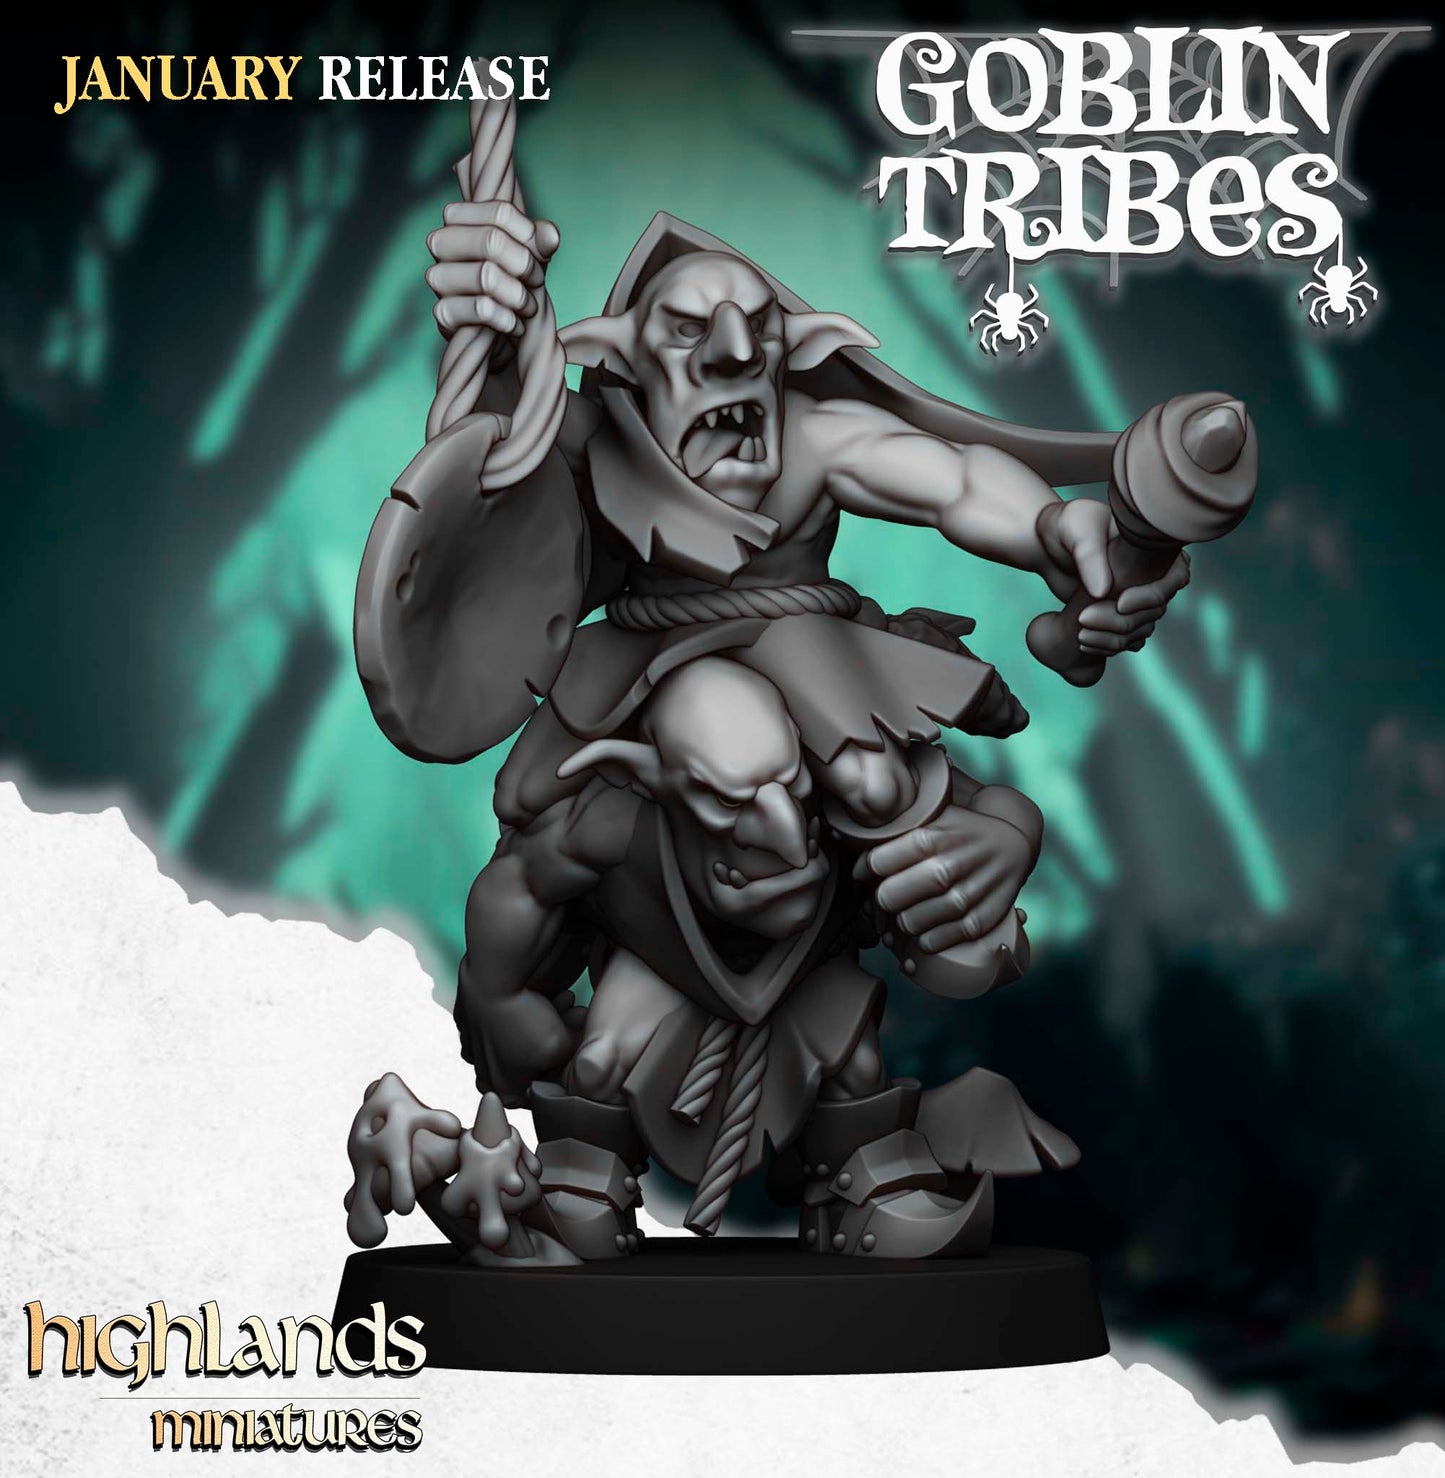 Swamp Goblins with Pikes/Hand Weapons